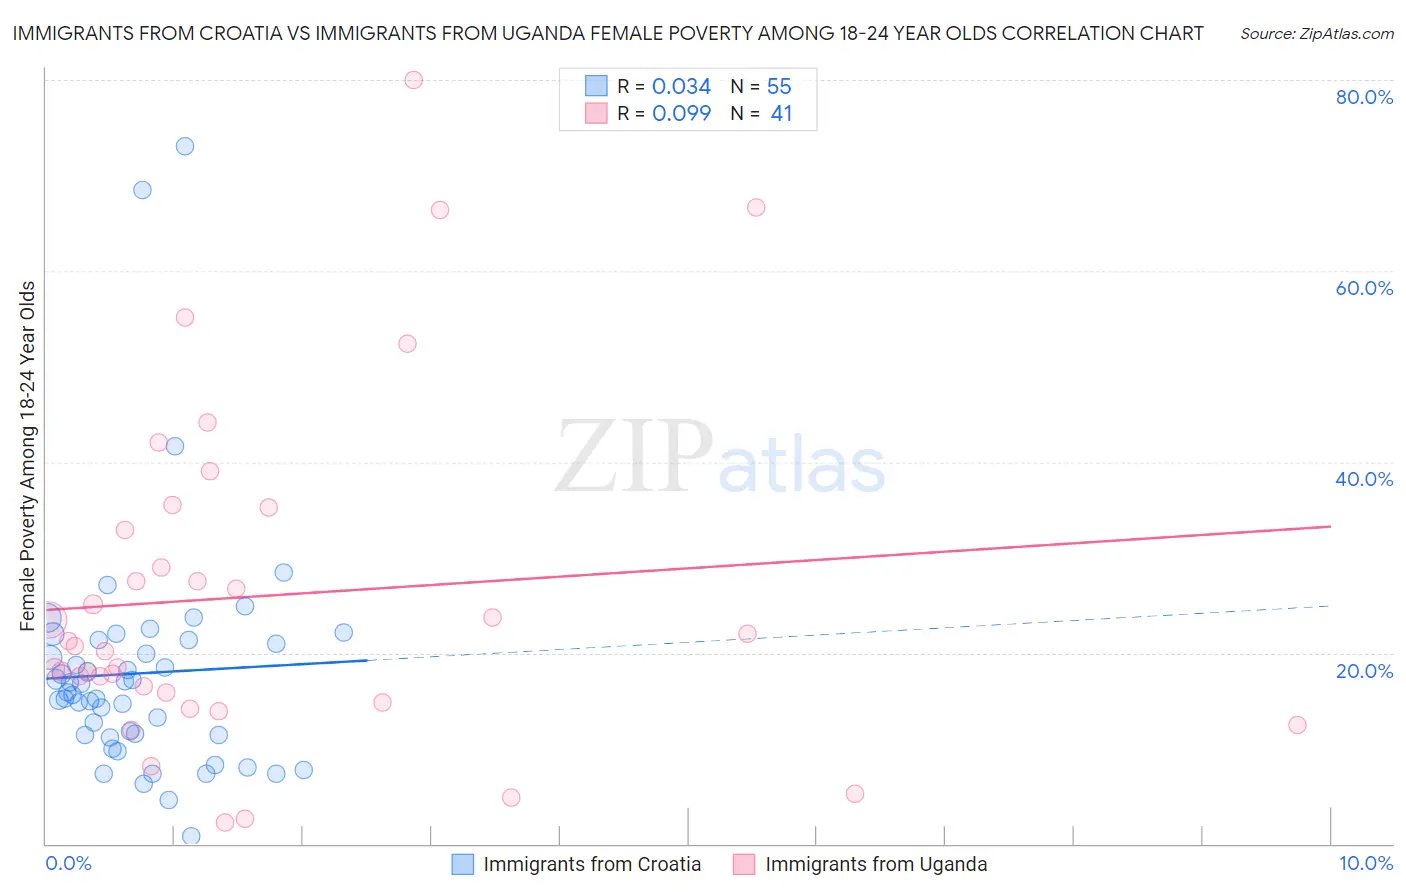 Immigrants from Croatia vs Immigrants from Uganda Female Poverty Among 18-24 Year Olds